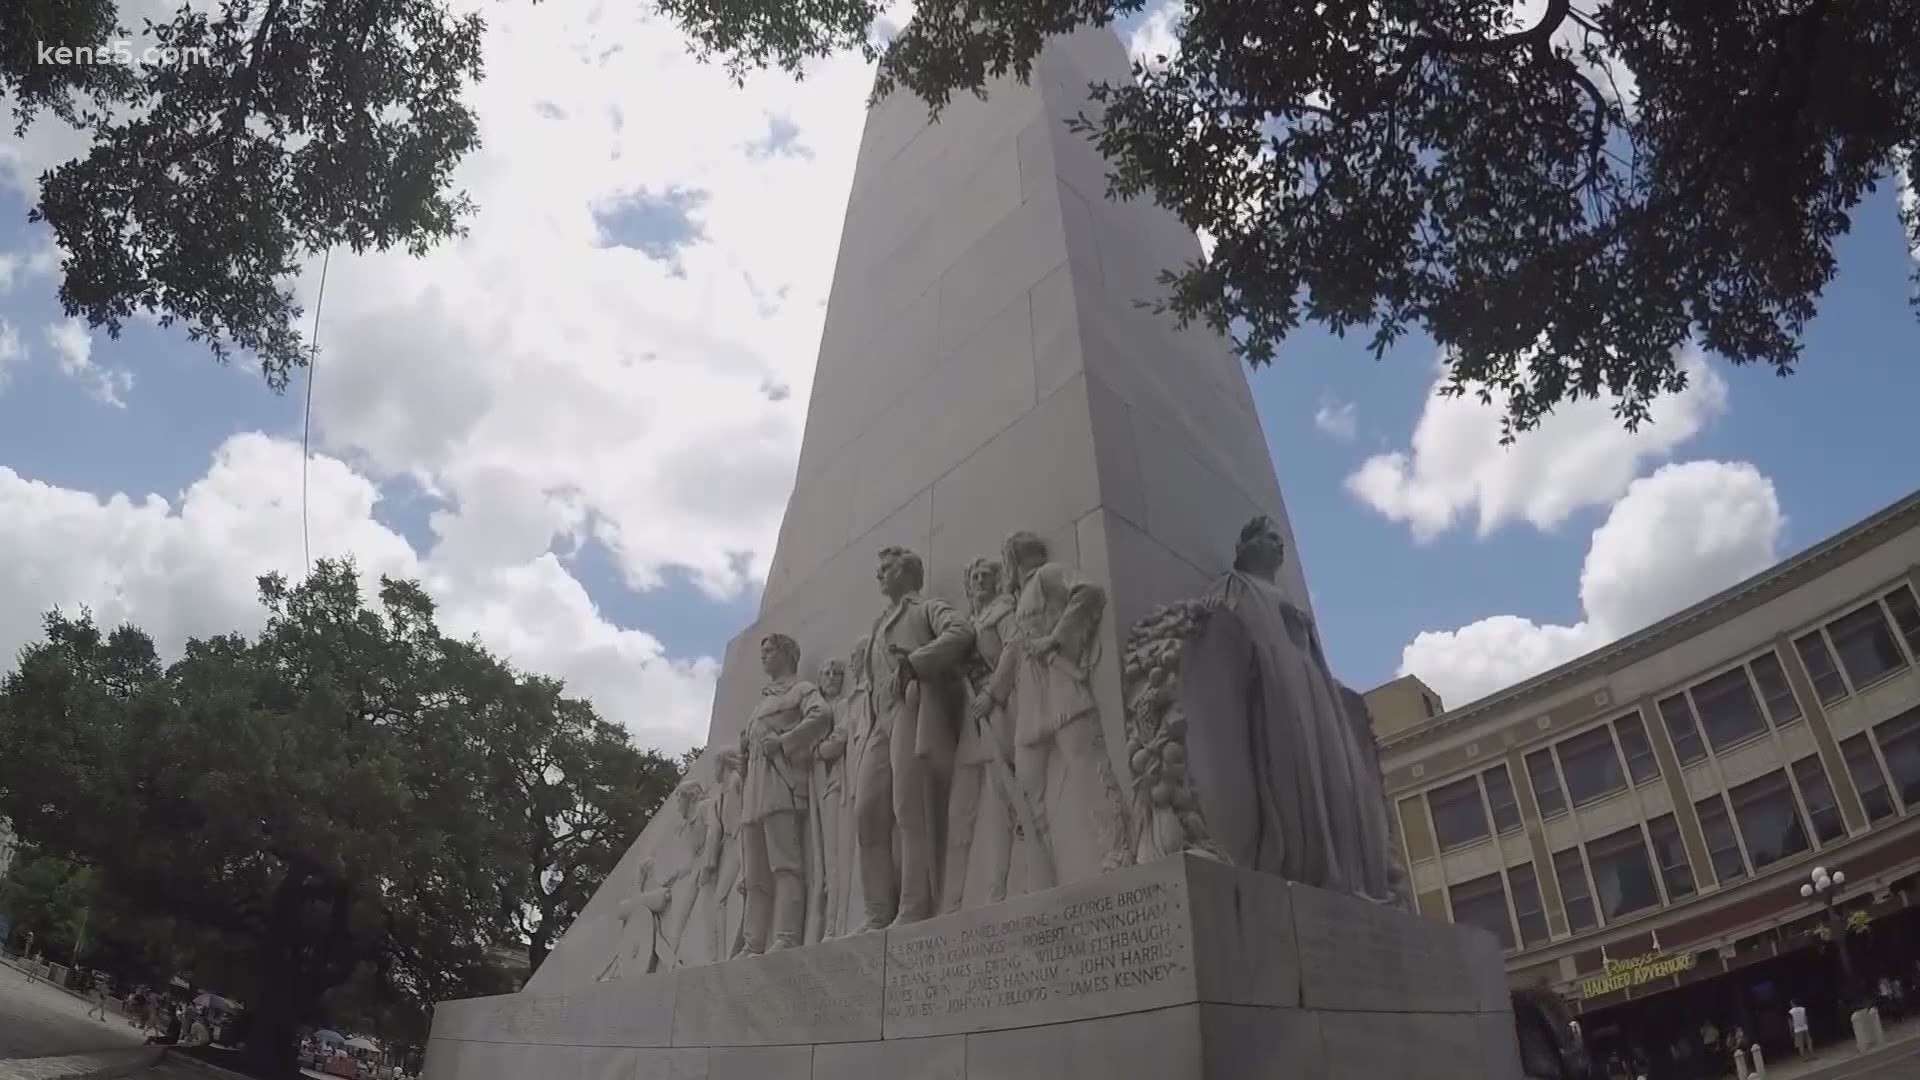 The Texas General Land Office now owns teh historic Alamo Cenotaph in San Antonio.